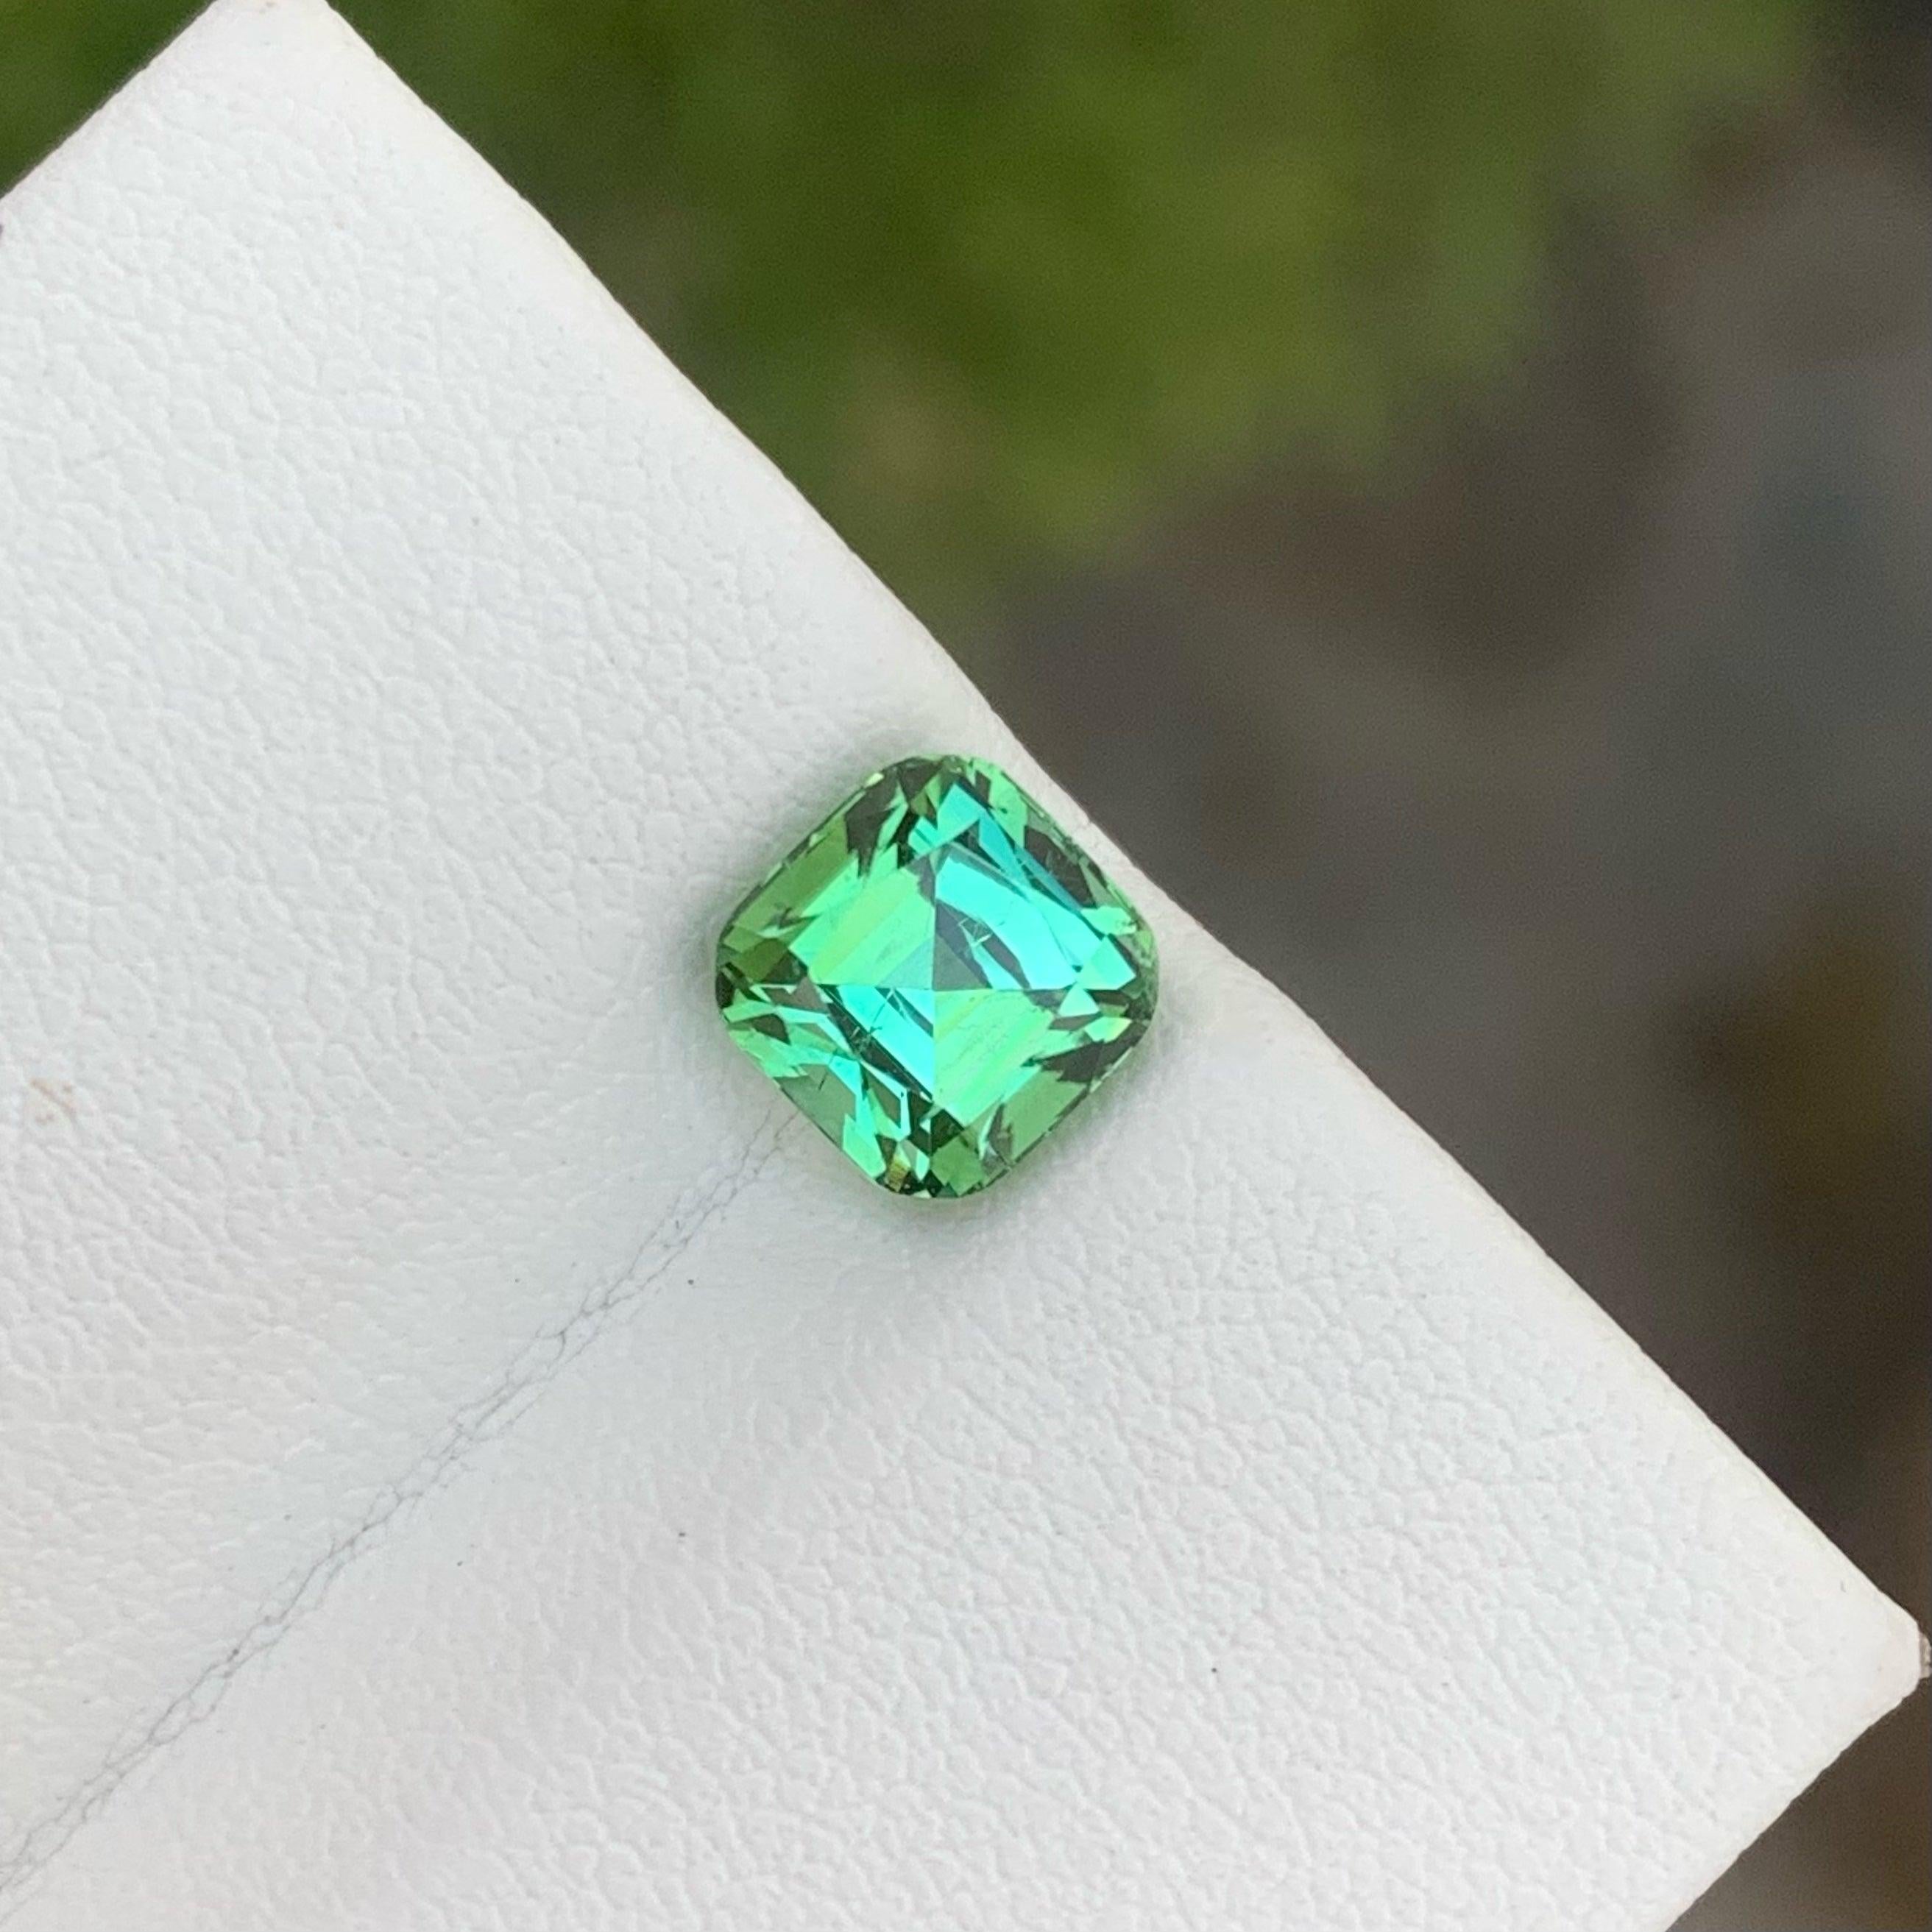 Natural Bluish Green Loose Tourmaline Gem, Tourmaline For Sale At Wholesale Price Natural High Quality 1.85 Carats SI Clarity Loose Tourmaline From Afghanistan.

Product Information
GEMSTONE TYPE: Natural Bluish Green Loose Tourmaline Gem
WEIGHT: